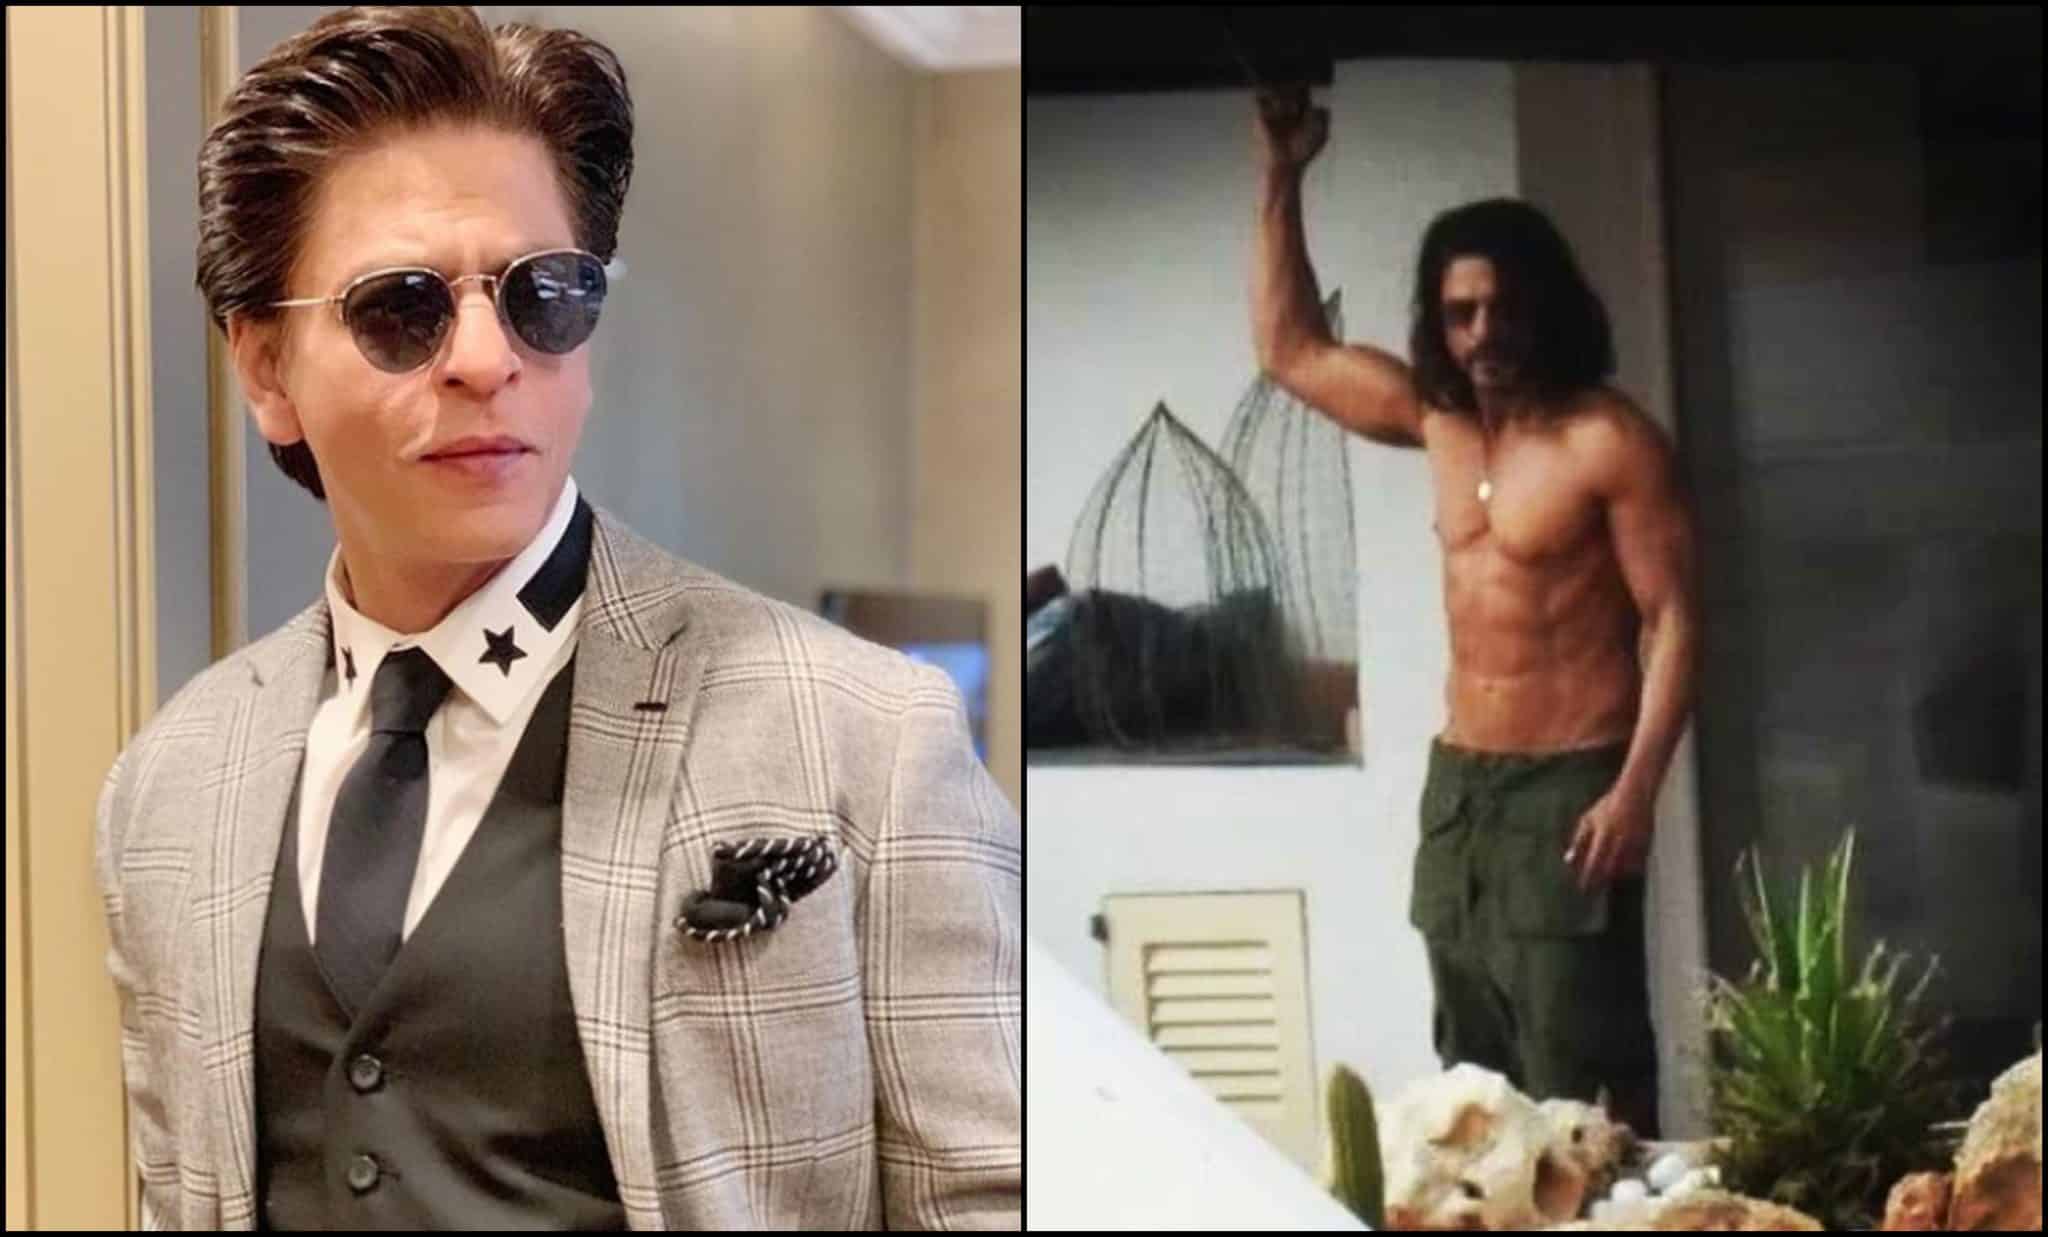 Shah Rukh Khan awaits 'Pathaan' to release, shares shirtless pic from bts